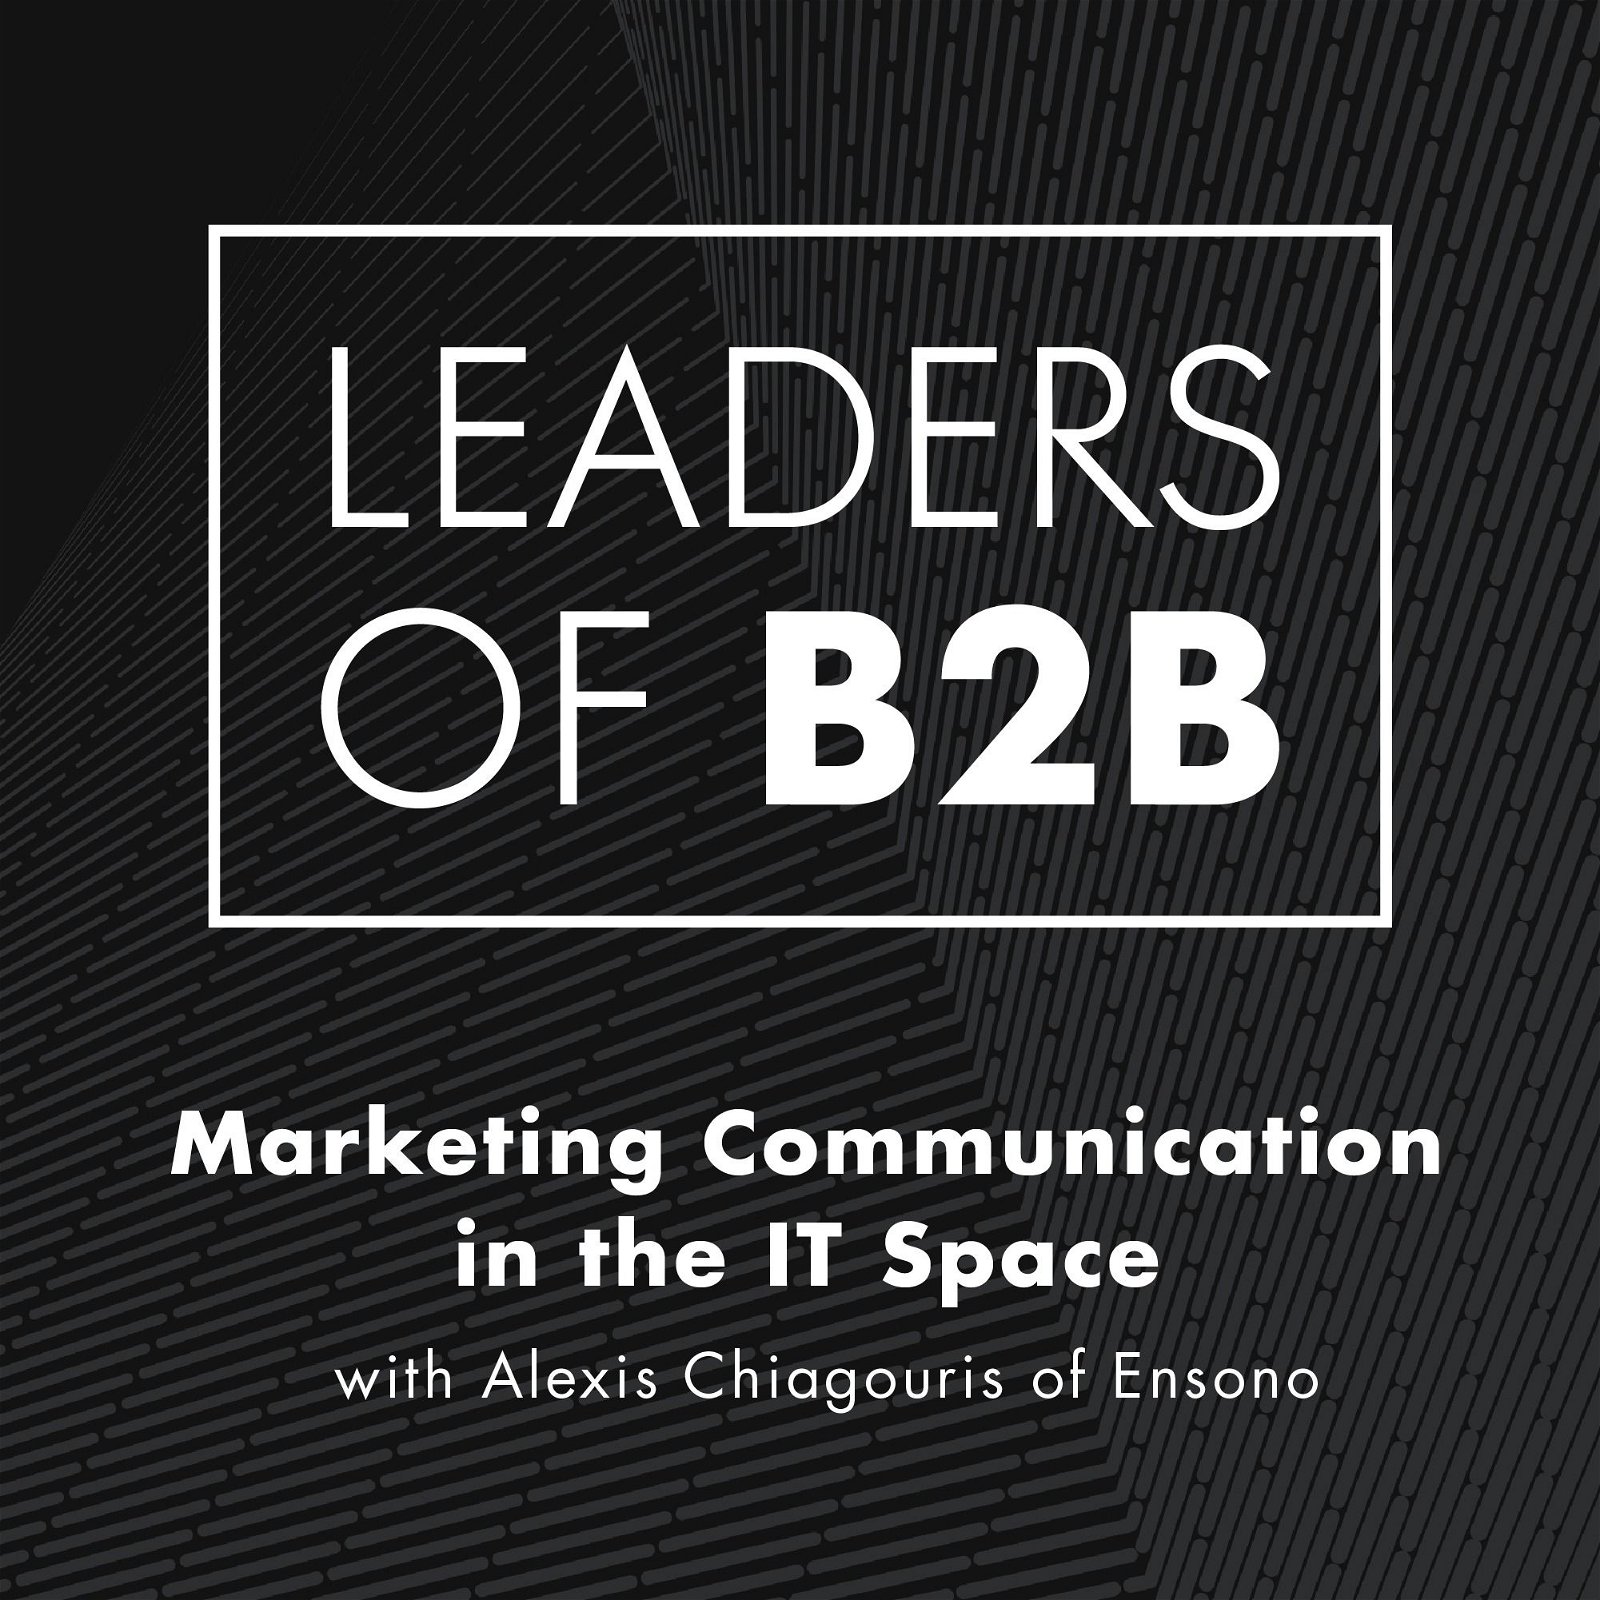 Marketing Communication in the IT Space with Alexis Chiagouris of Ensono